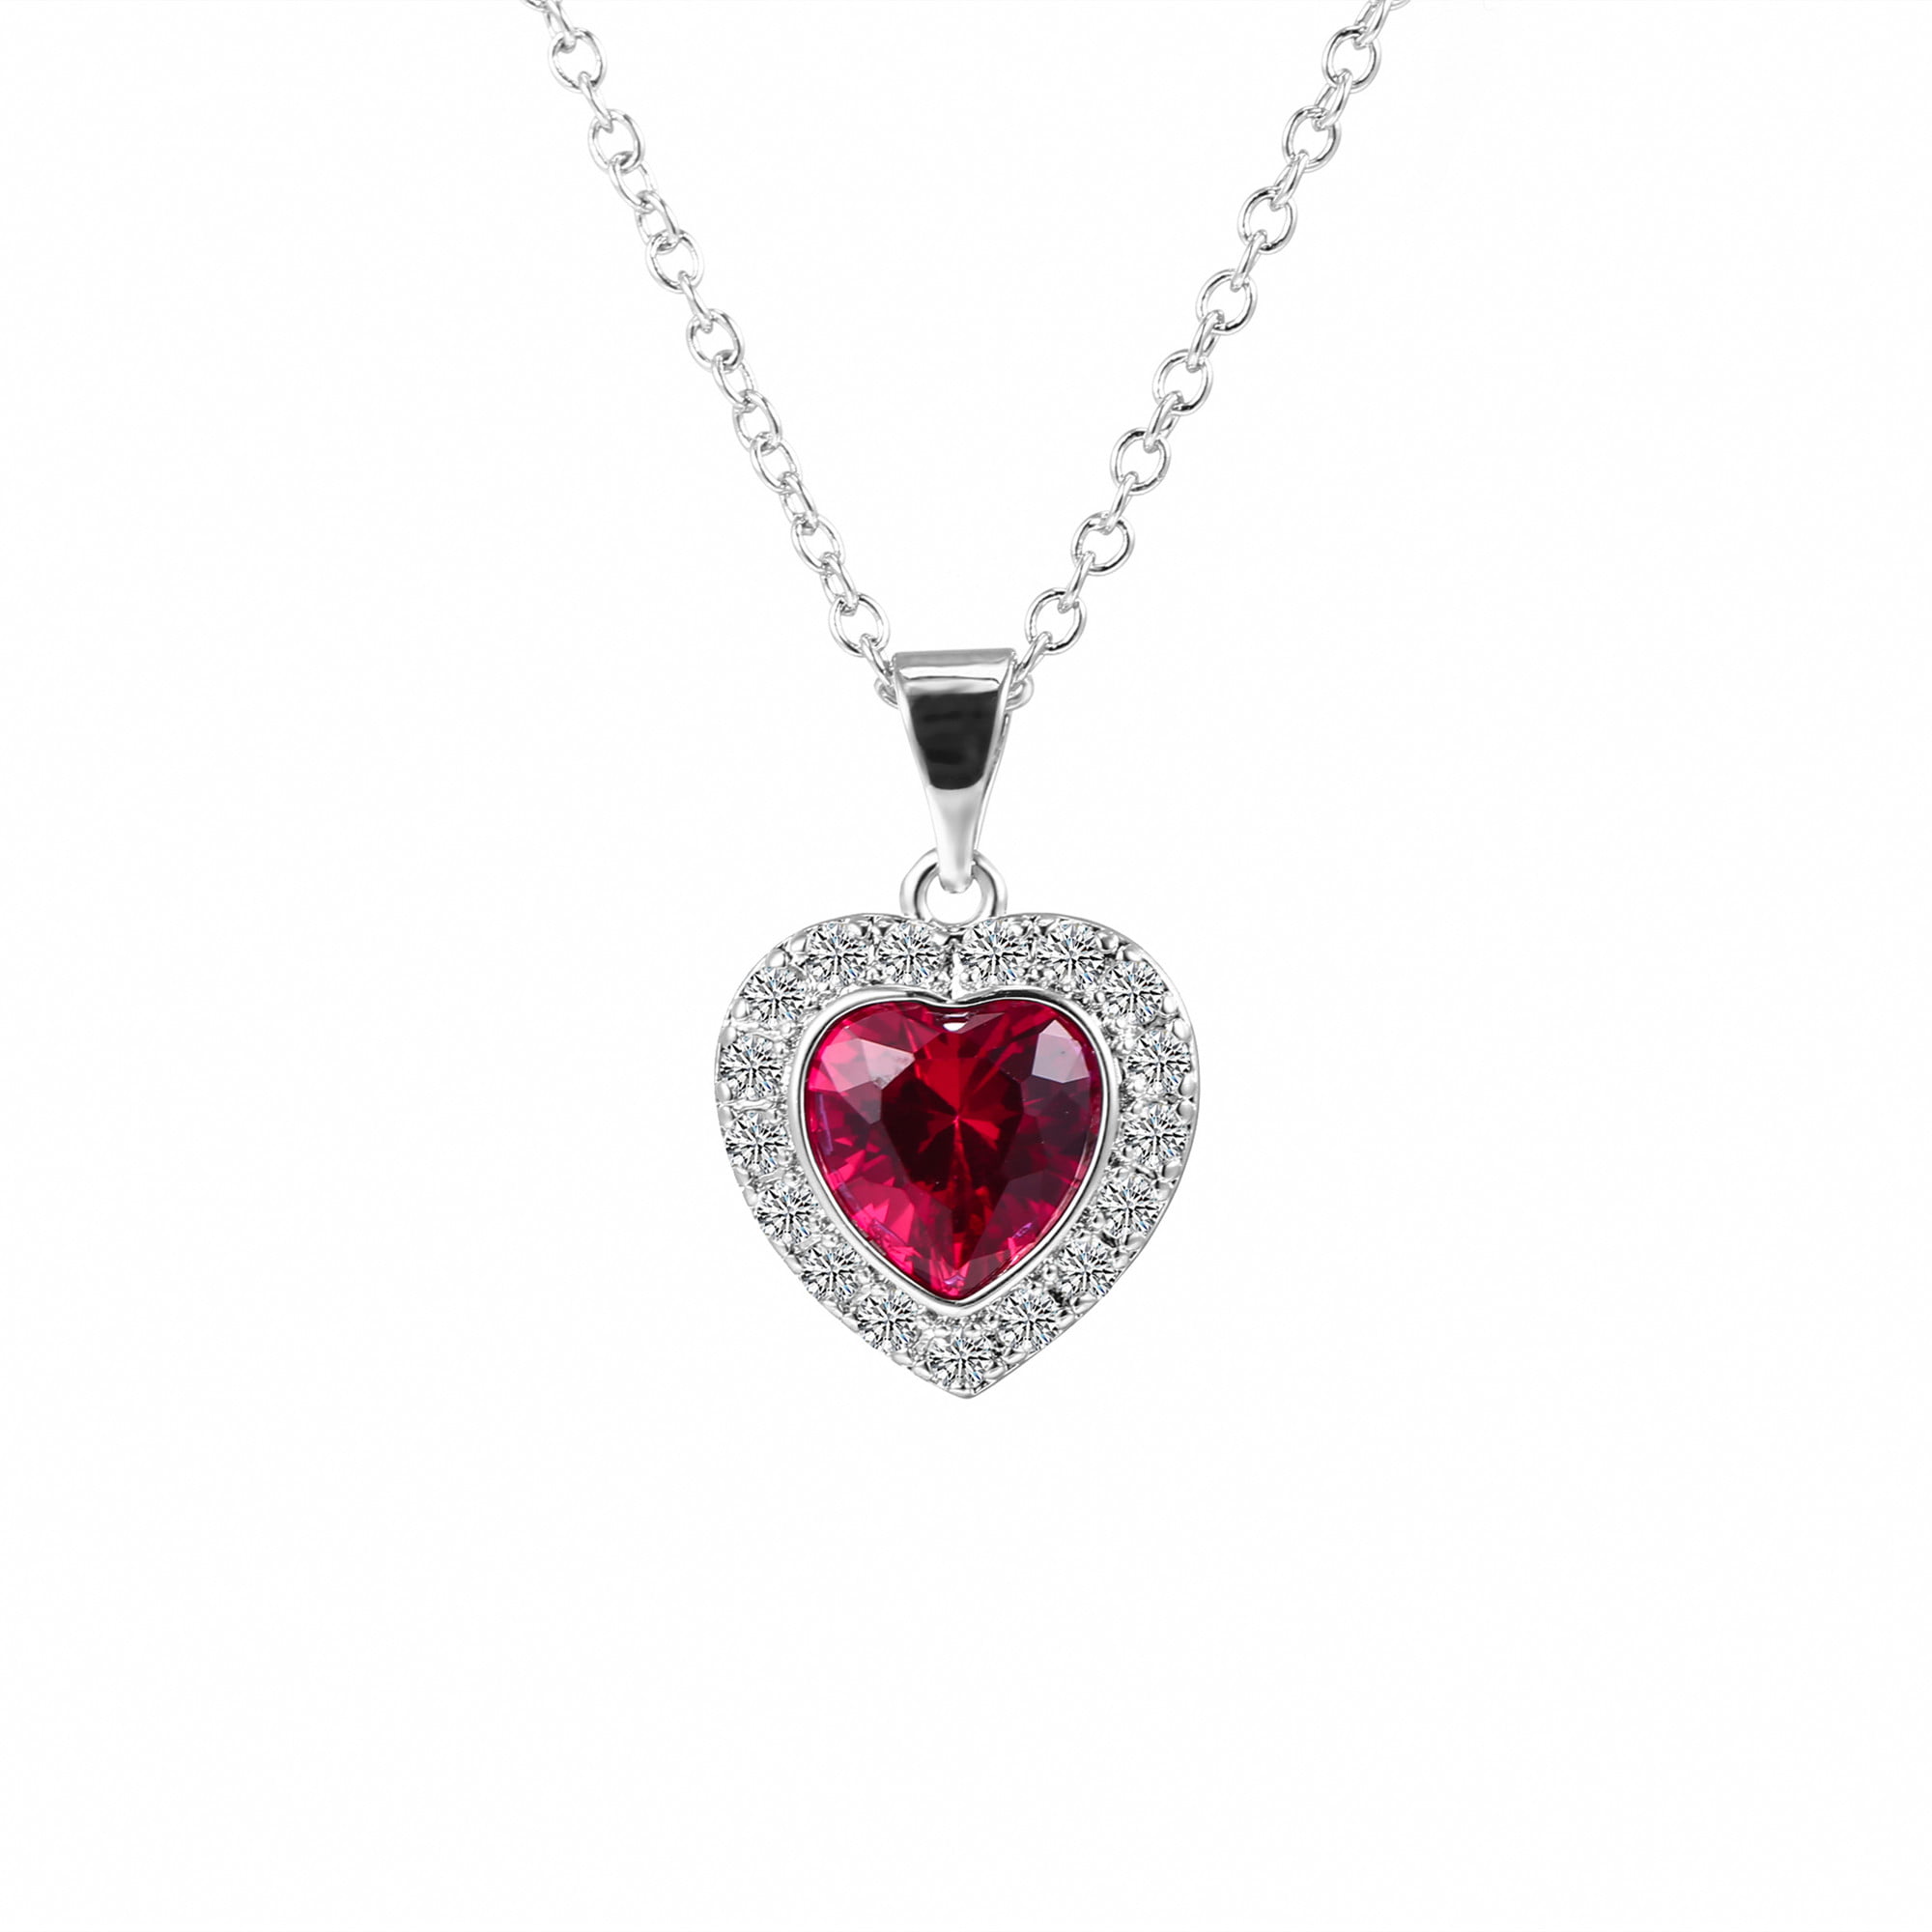 Gorgeous 3.5 Ct Heart Ruby Red Diamond Halo Pendant Women Necklace Gold Plated 